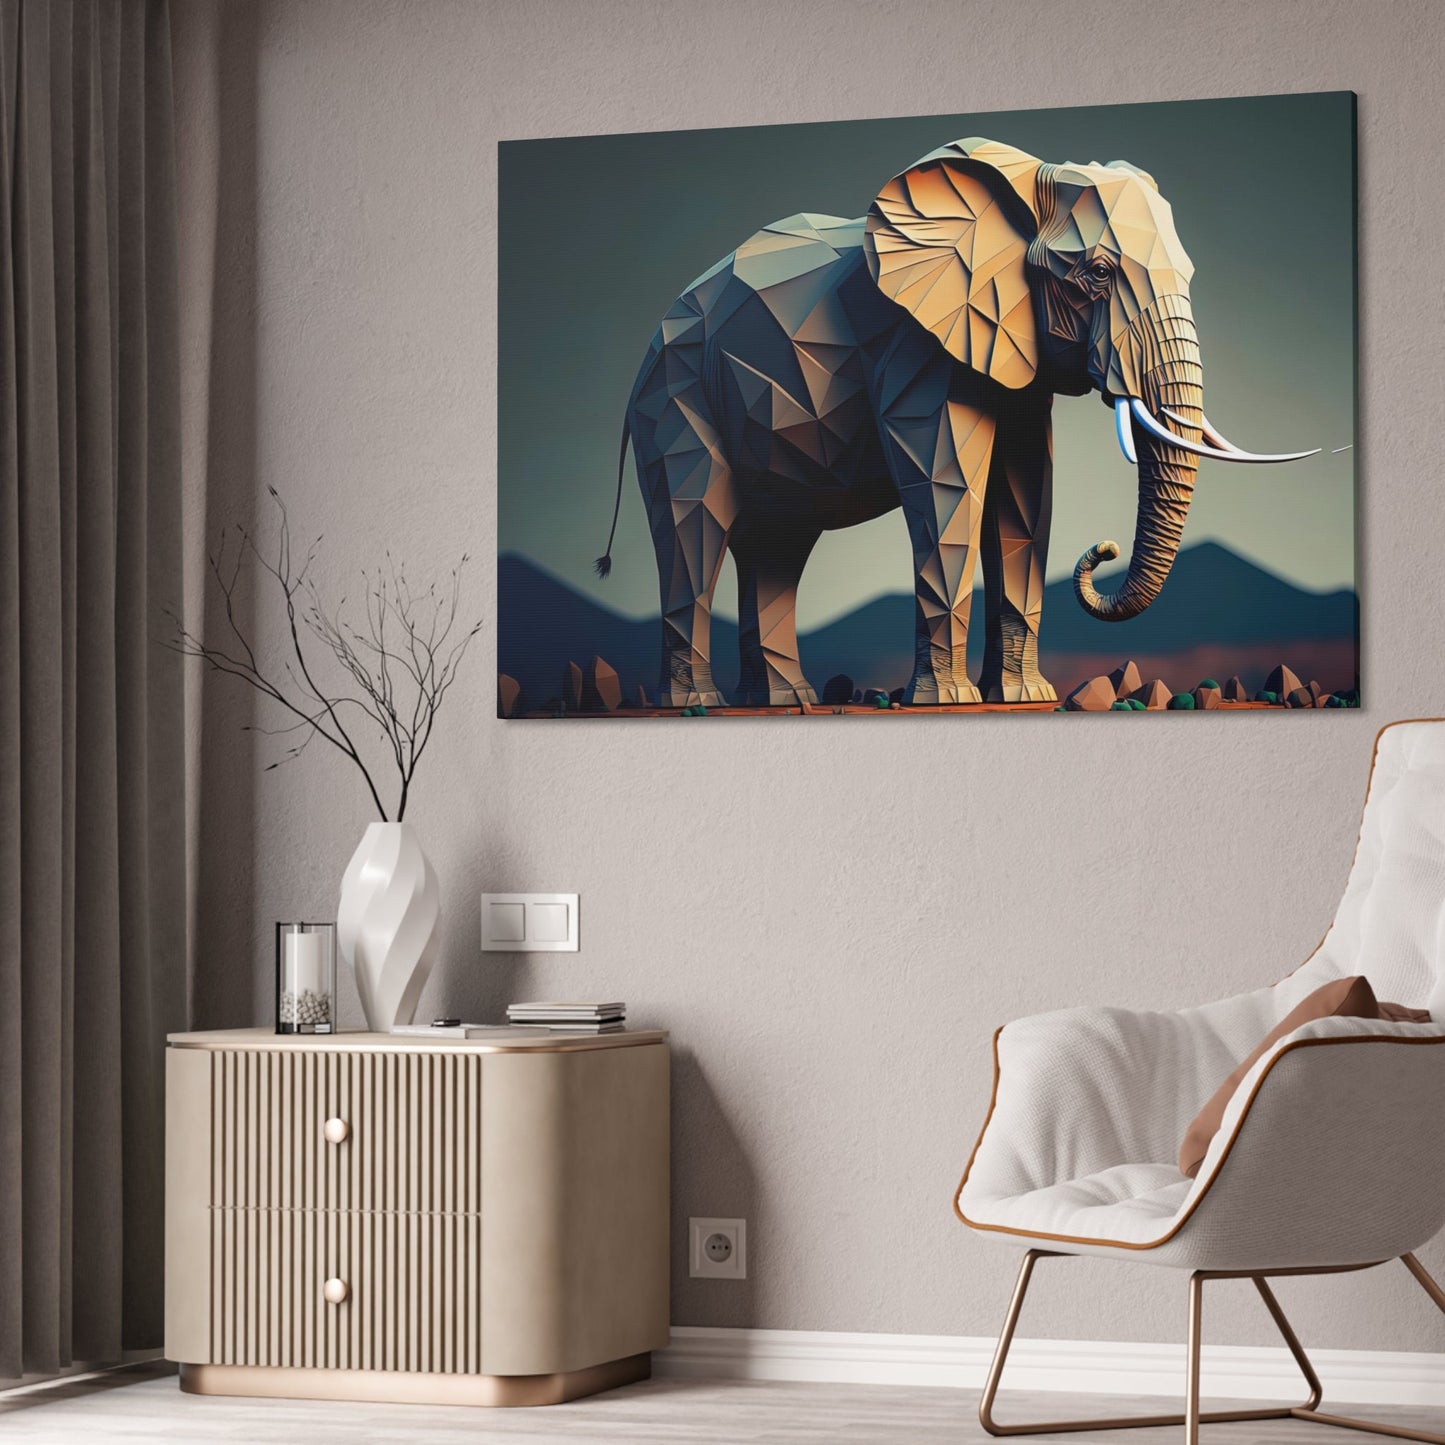 The Gentle Giant: Framed Canvas & Poster Print of an Elephant